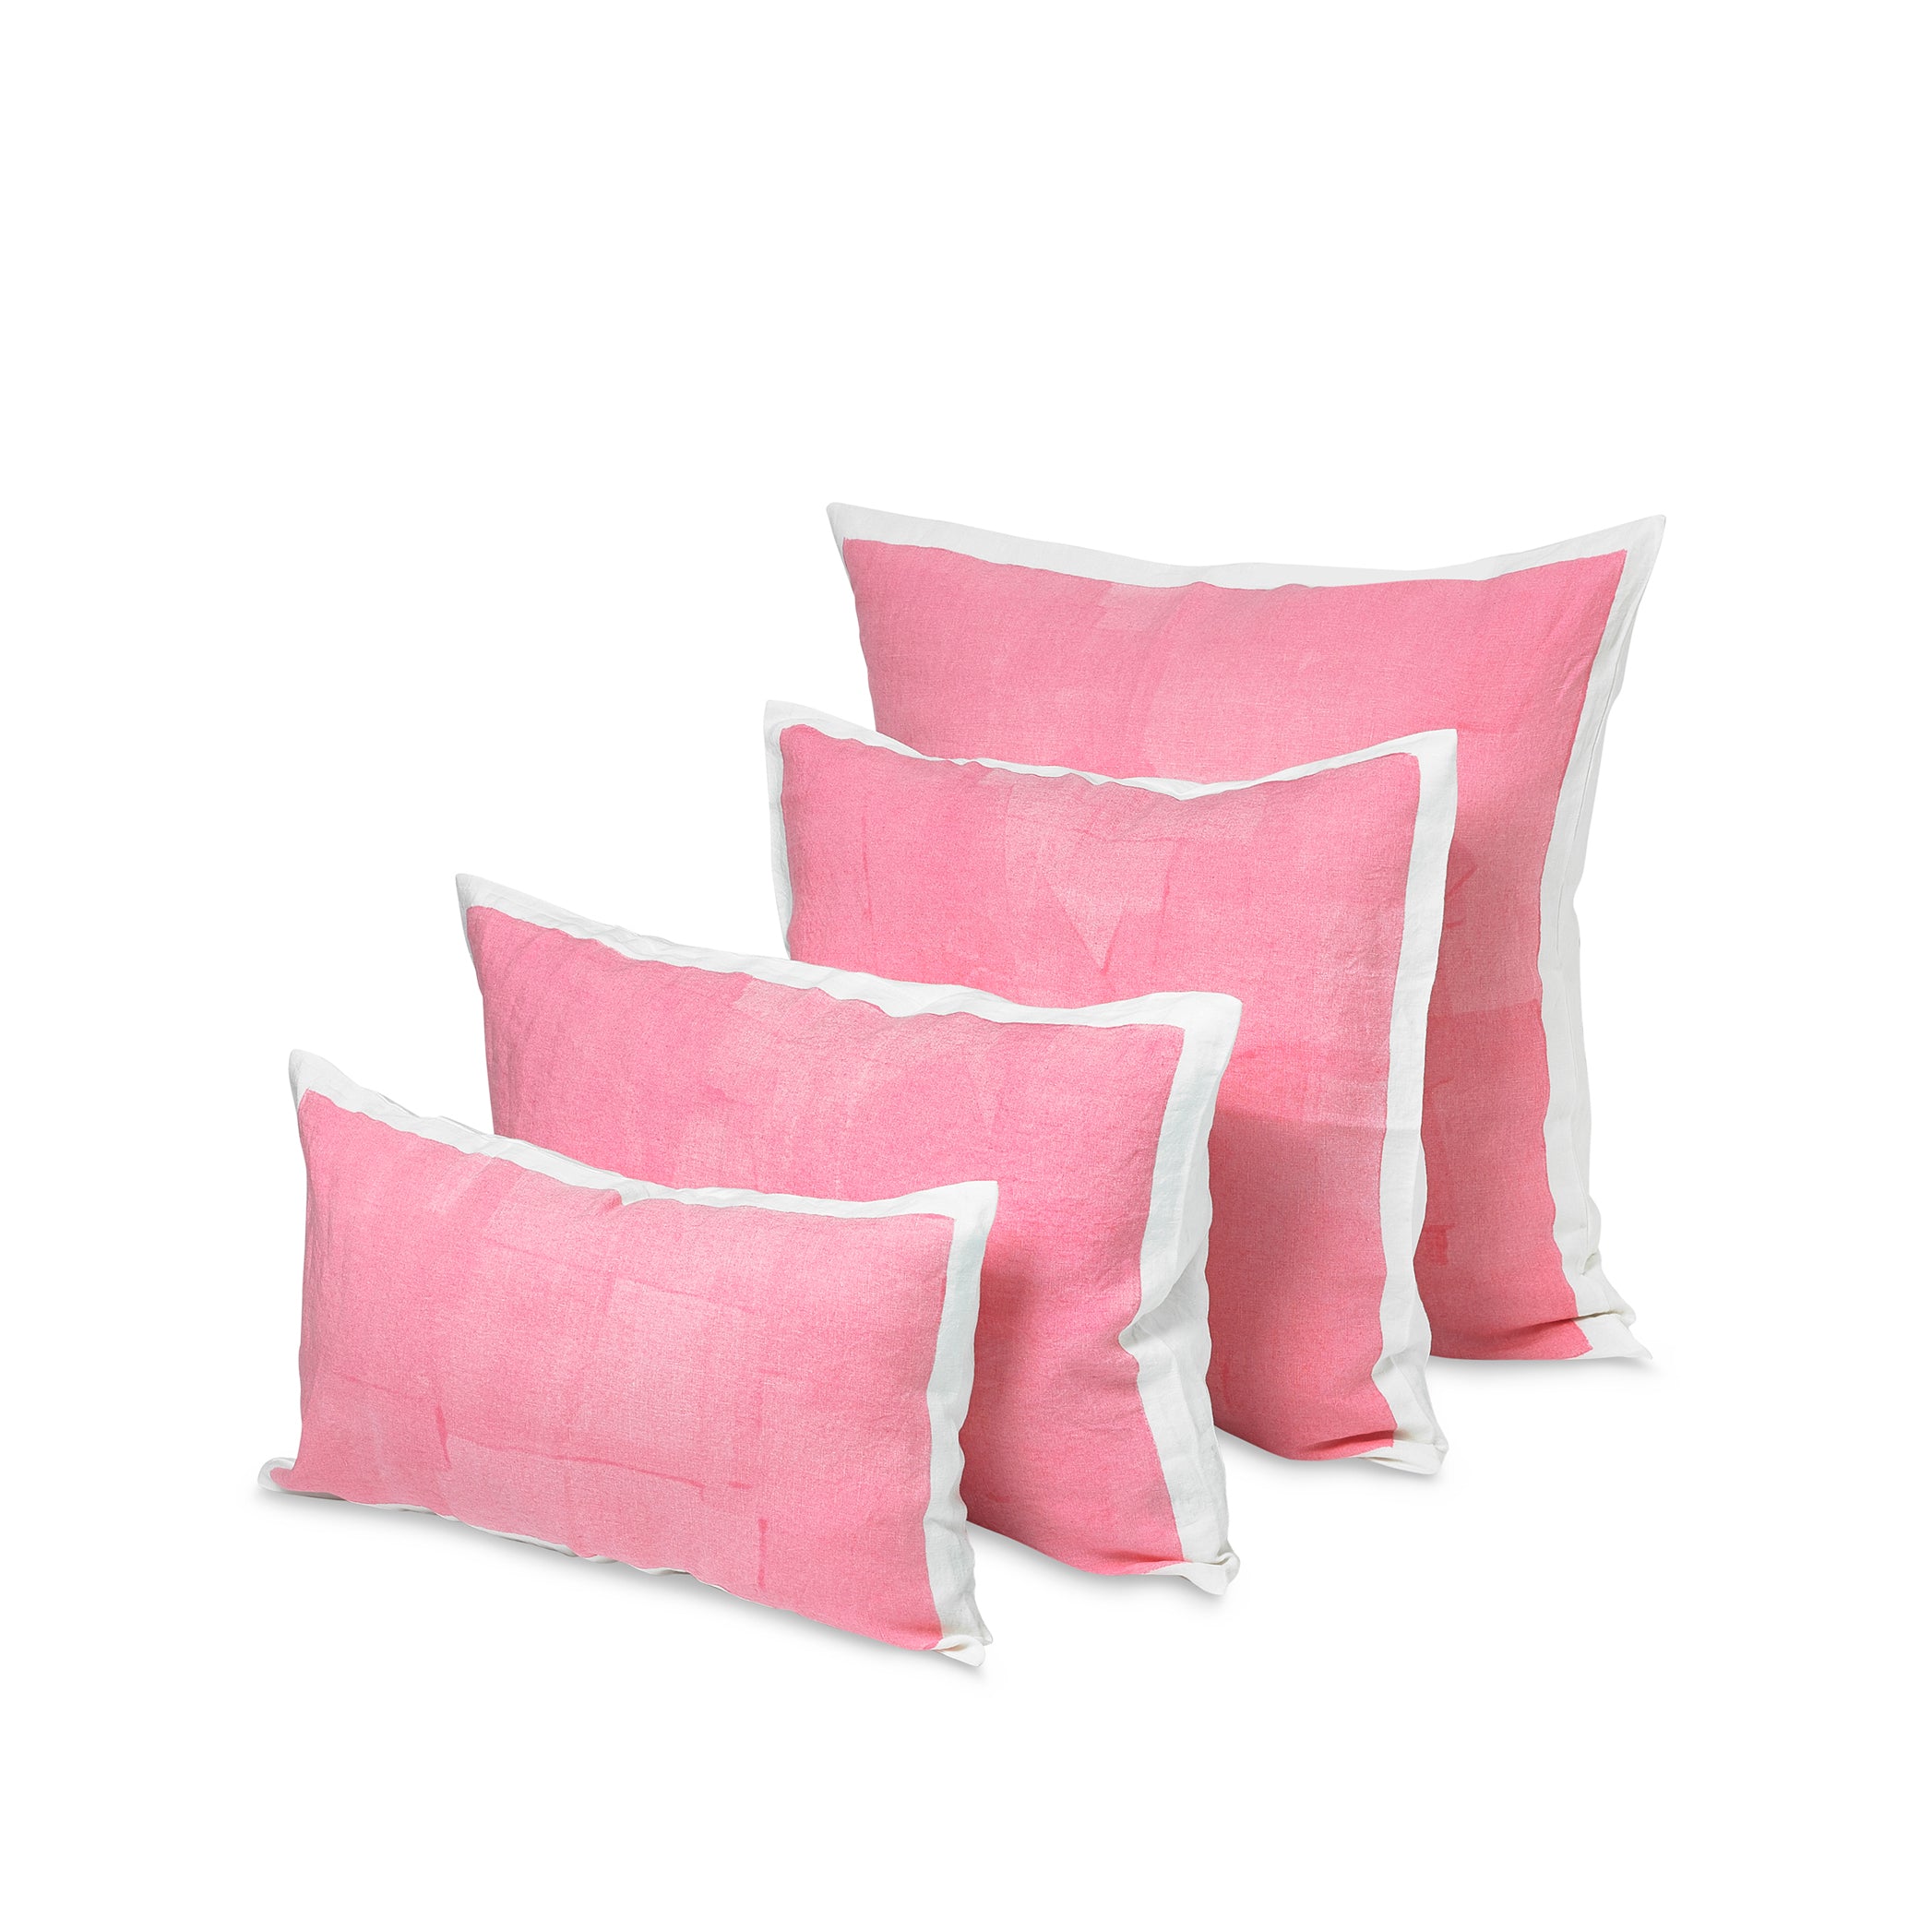 Hand Painted Linen Cushion in Rose Pink, 60cm x 40cm